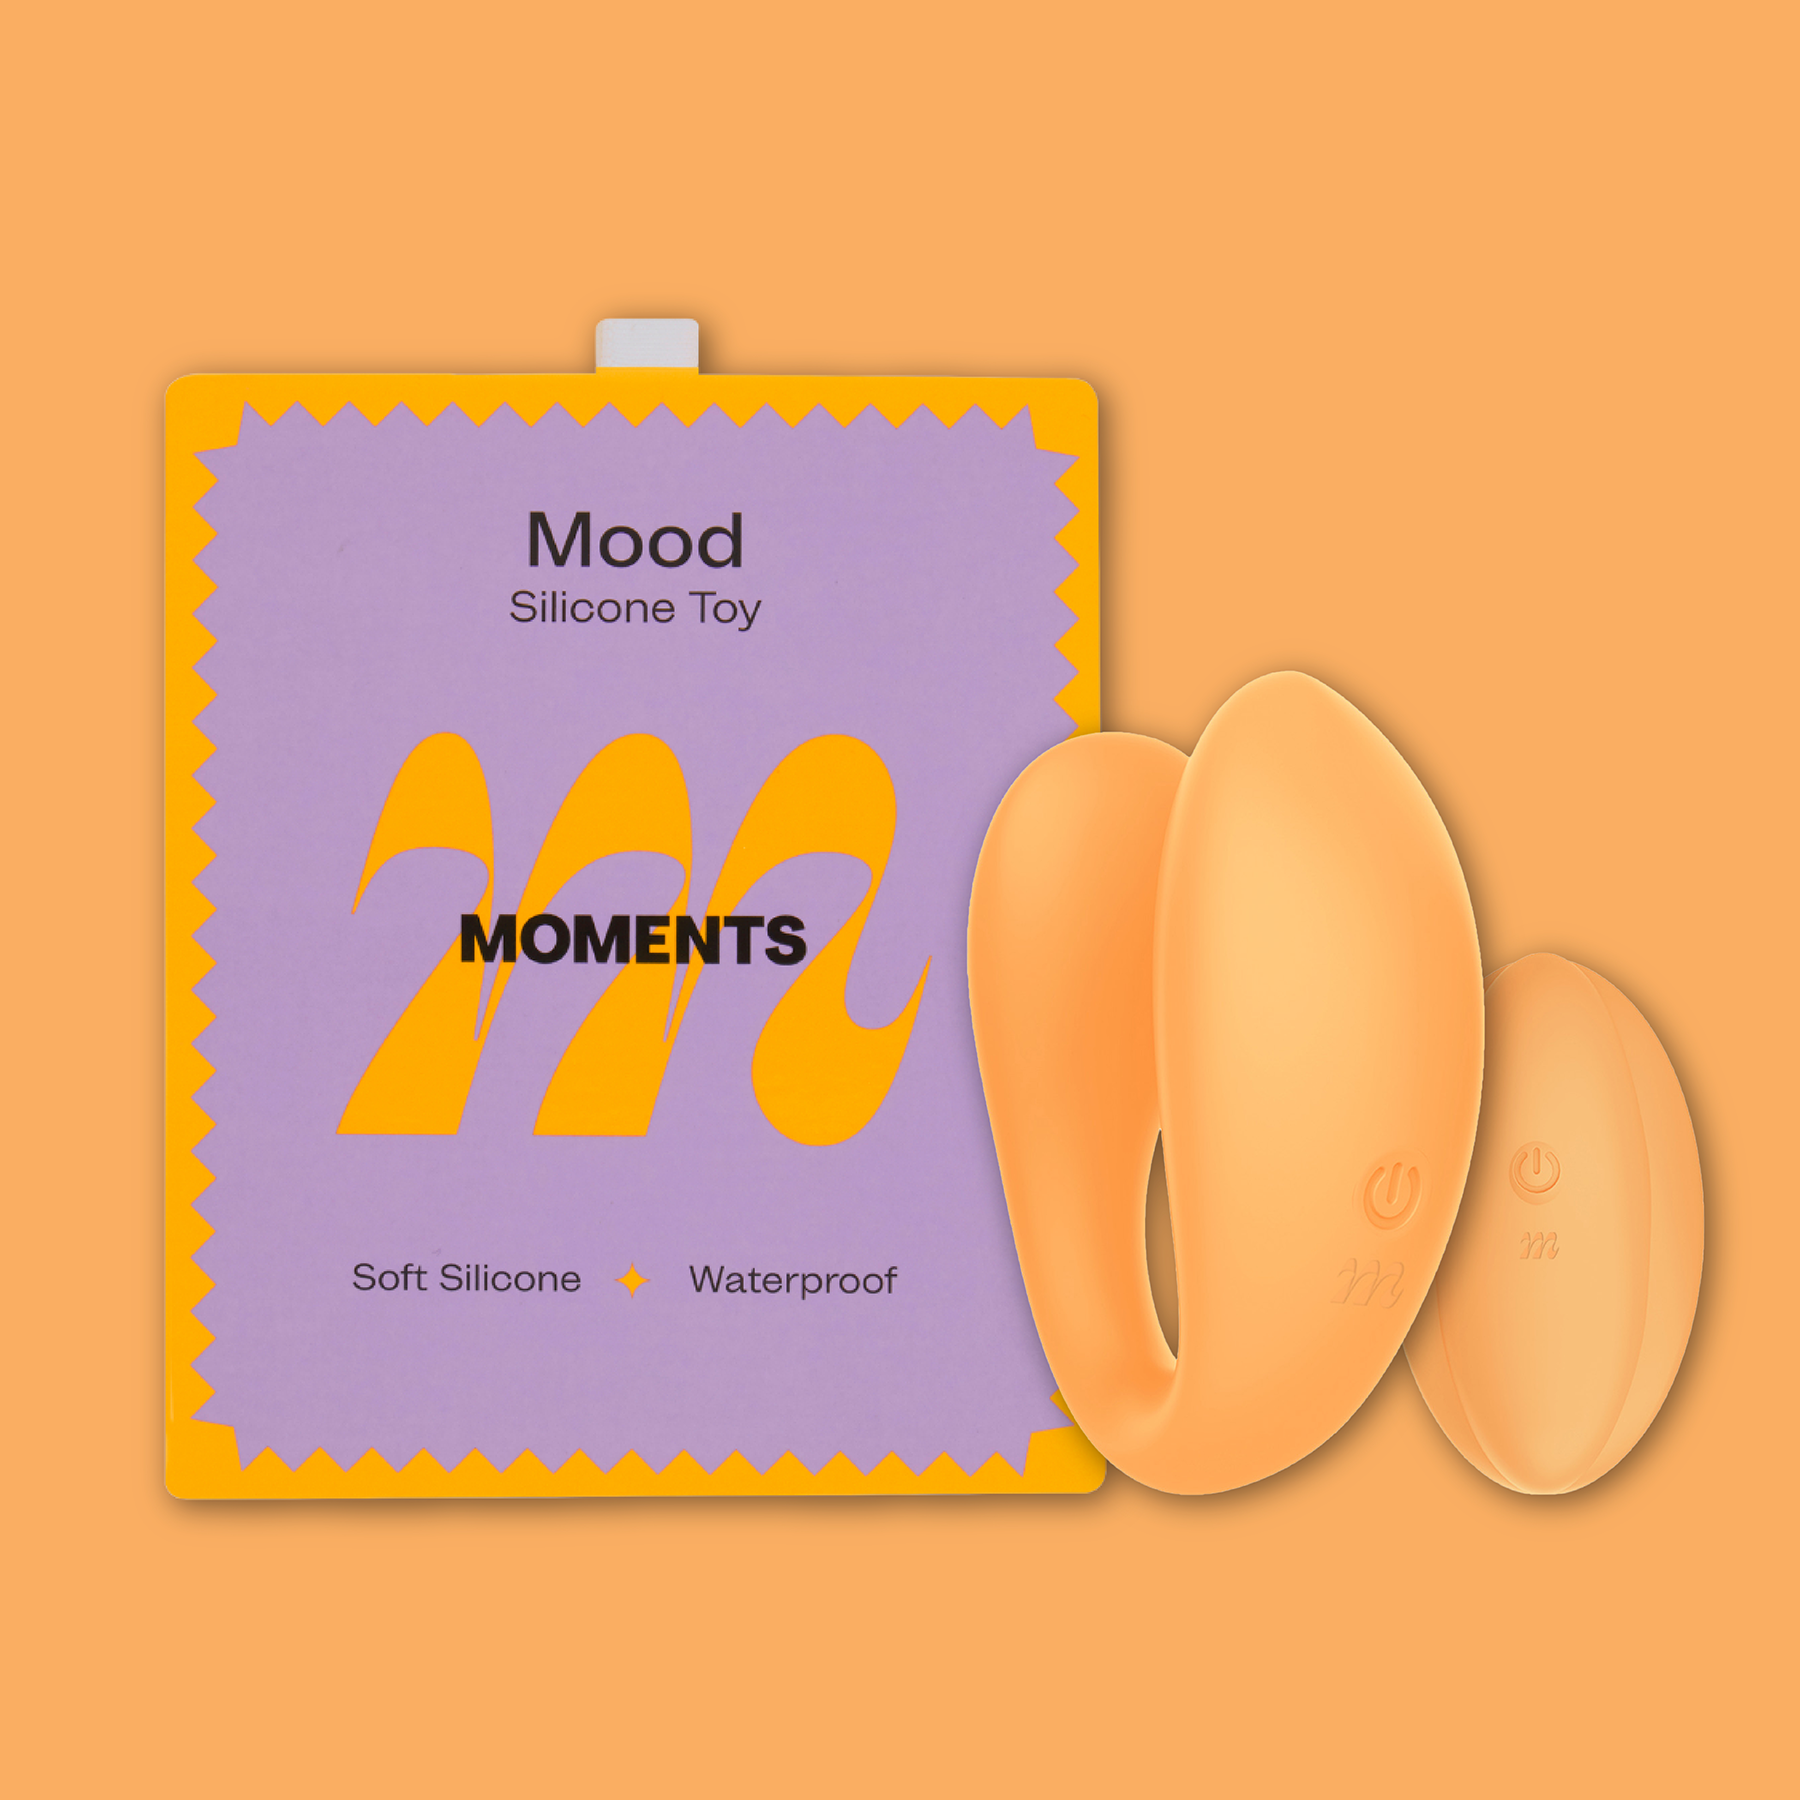 Moments Mood sex toy for increased pleasure for both